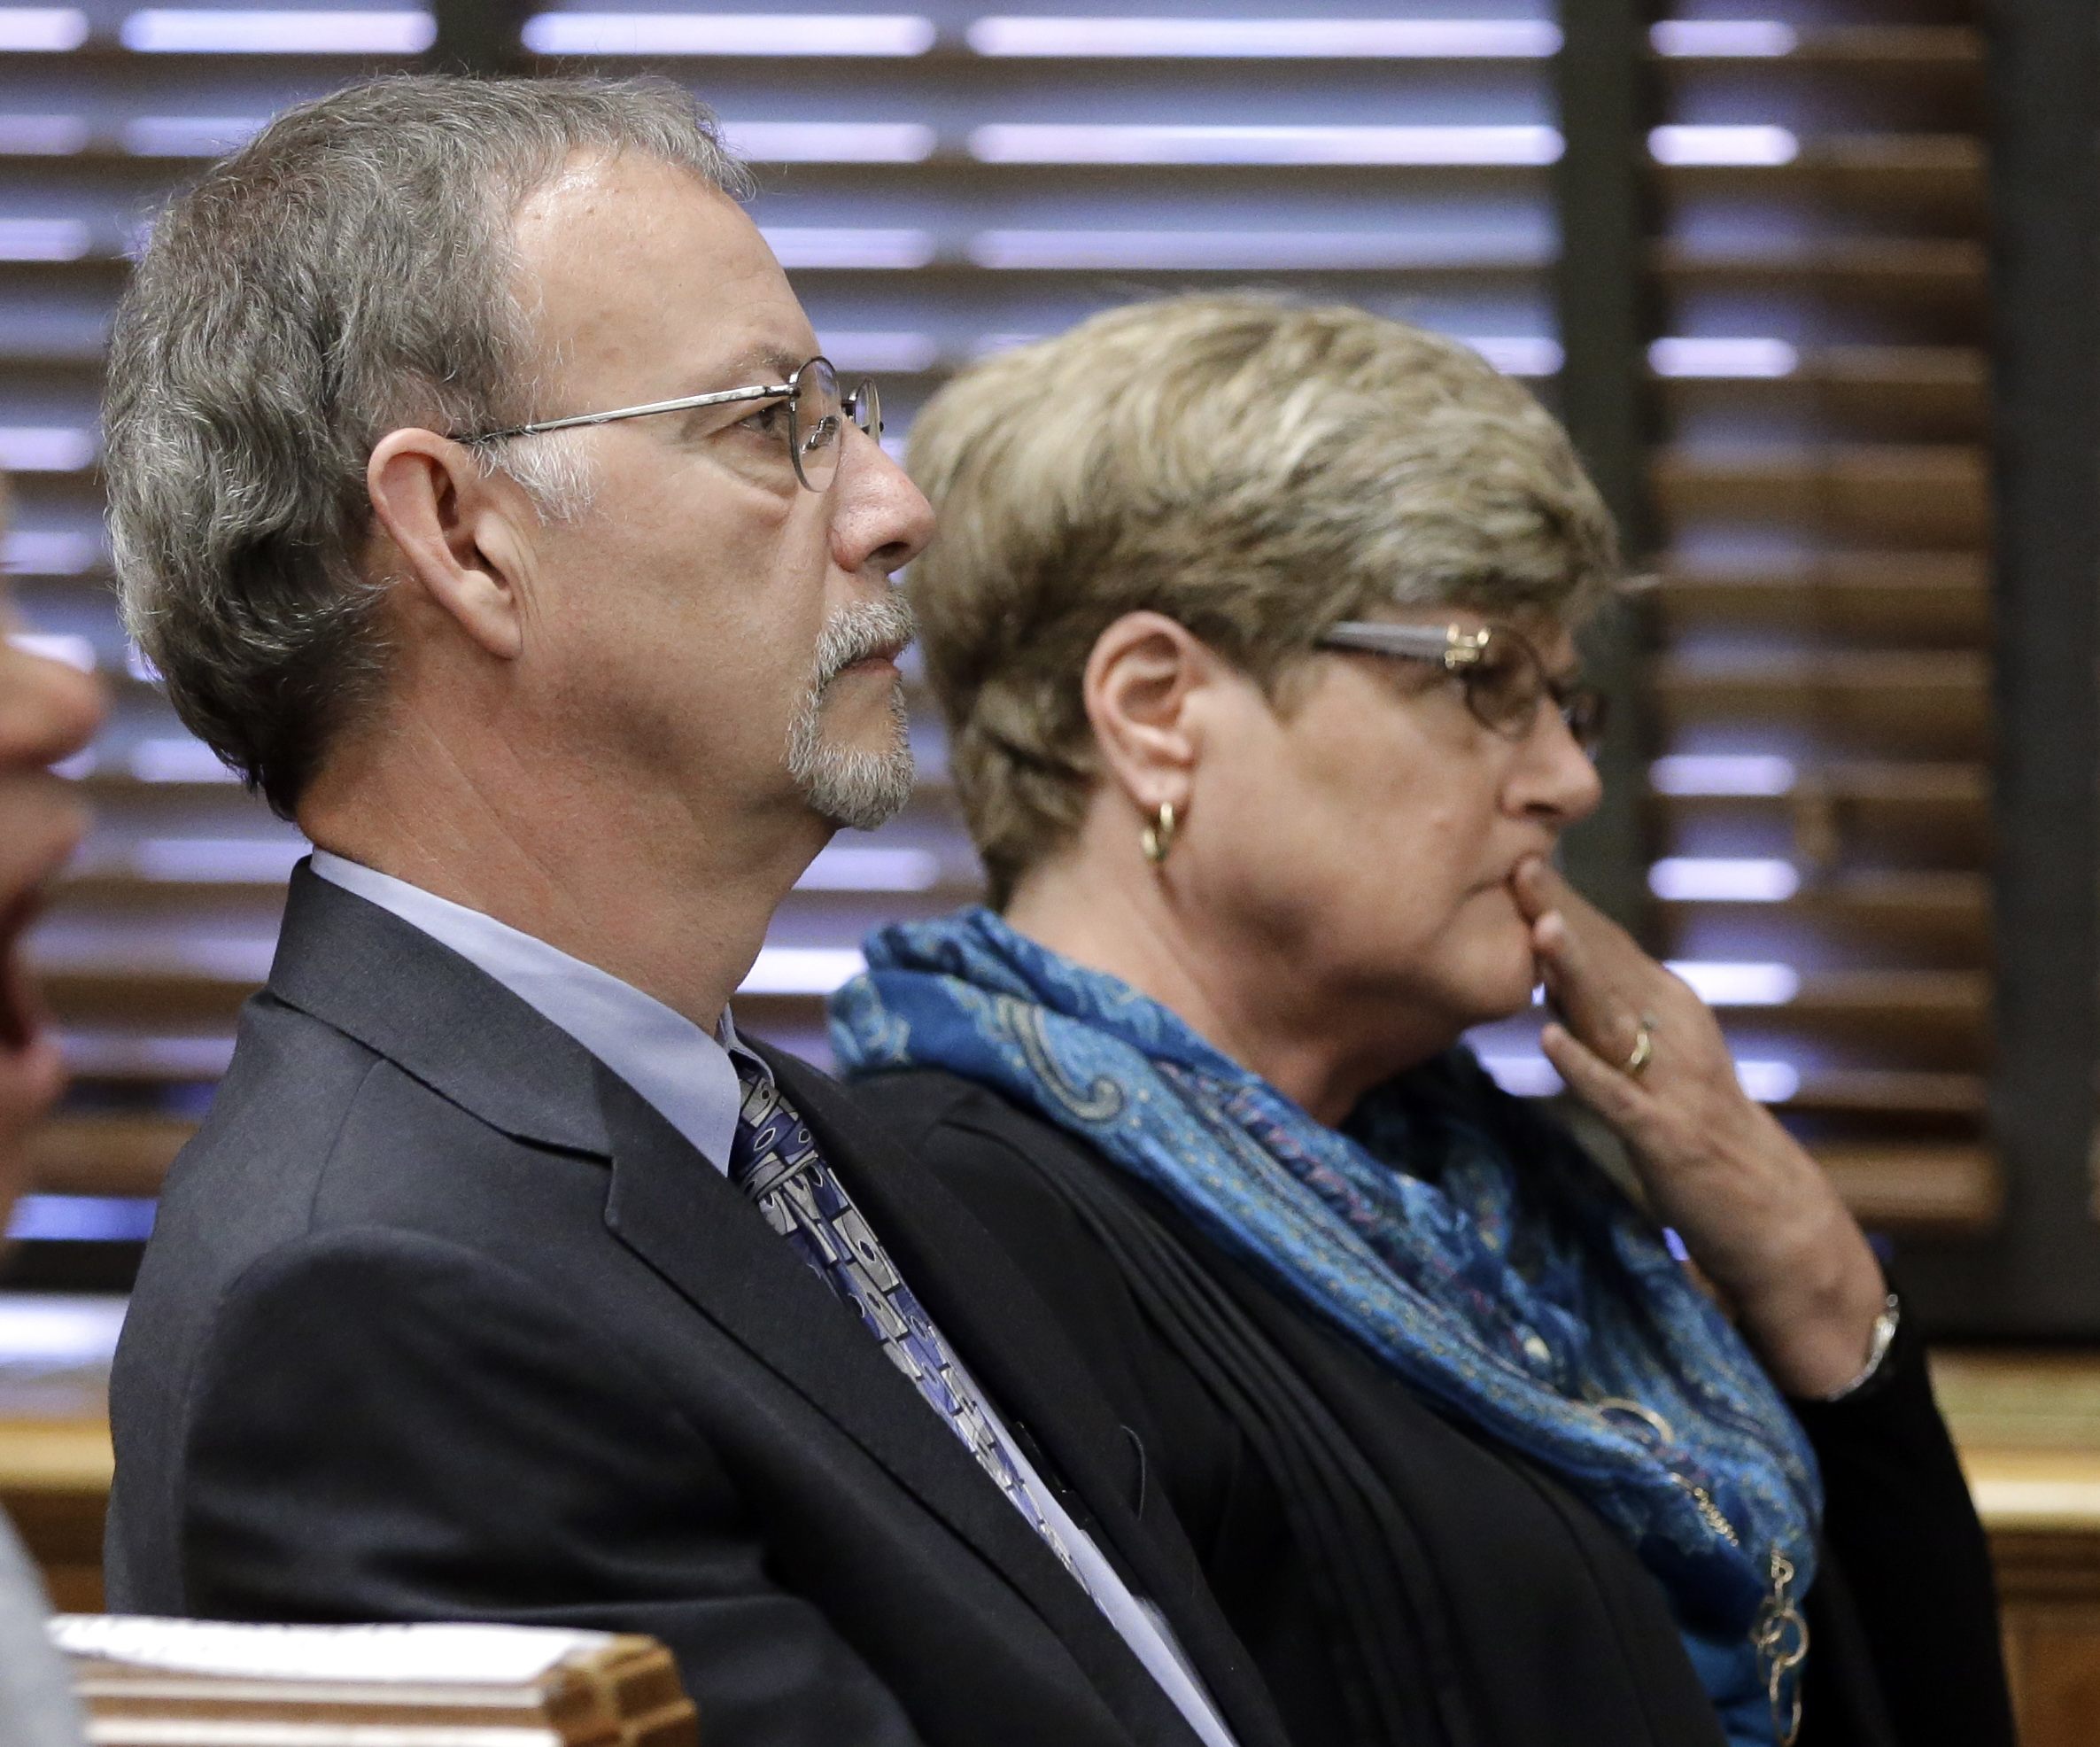 PHOTO:Steven and Paula Andrews, the parents of sportscaster and television host Erin Andrews, listen during court proceedings, March 1, 2016, in Nashville, Tenn.  